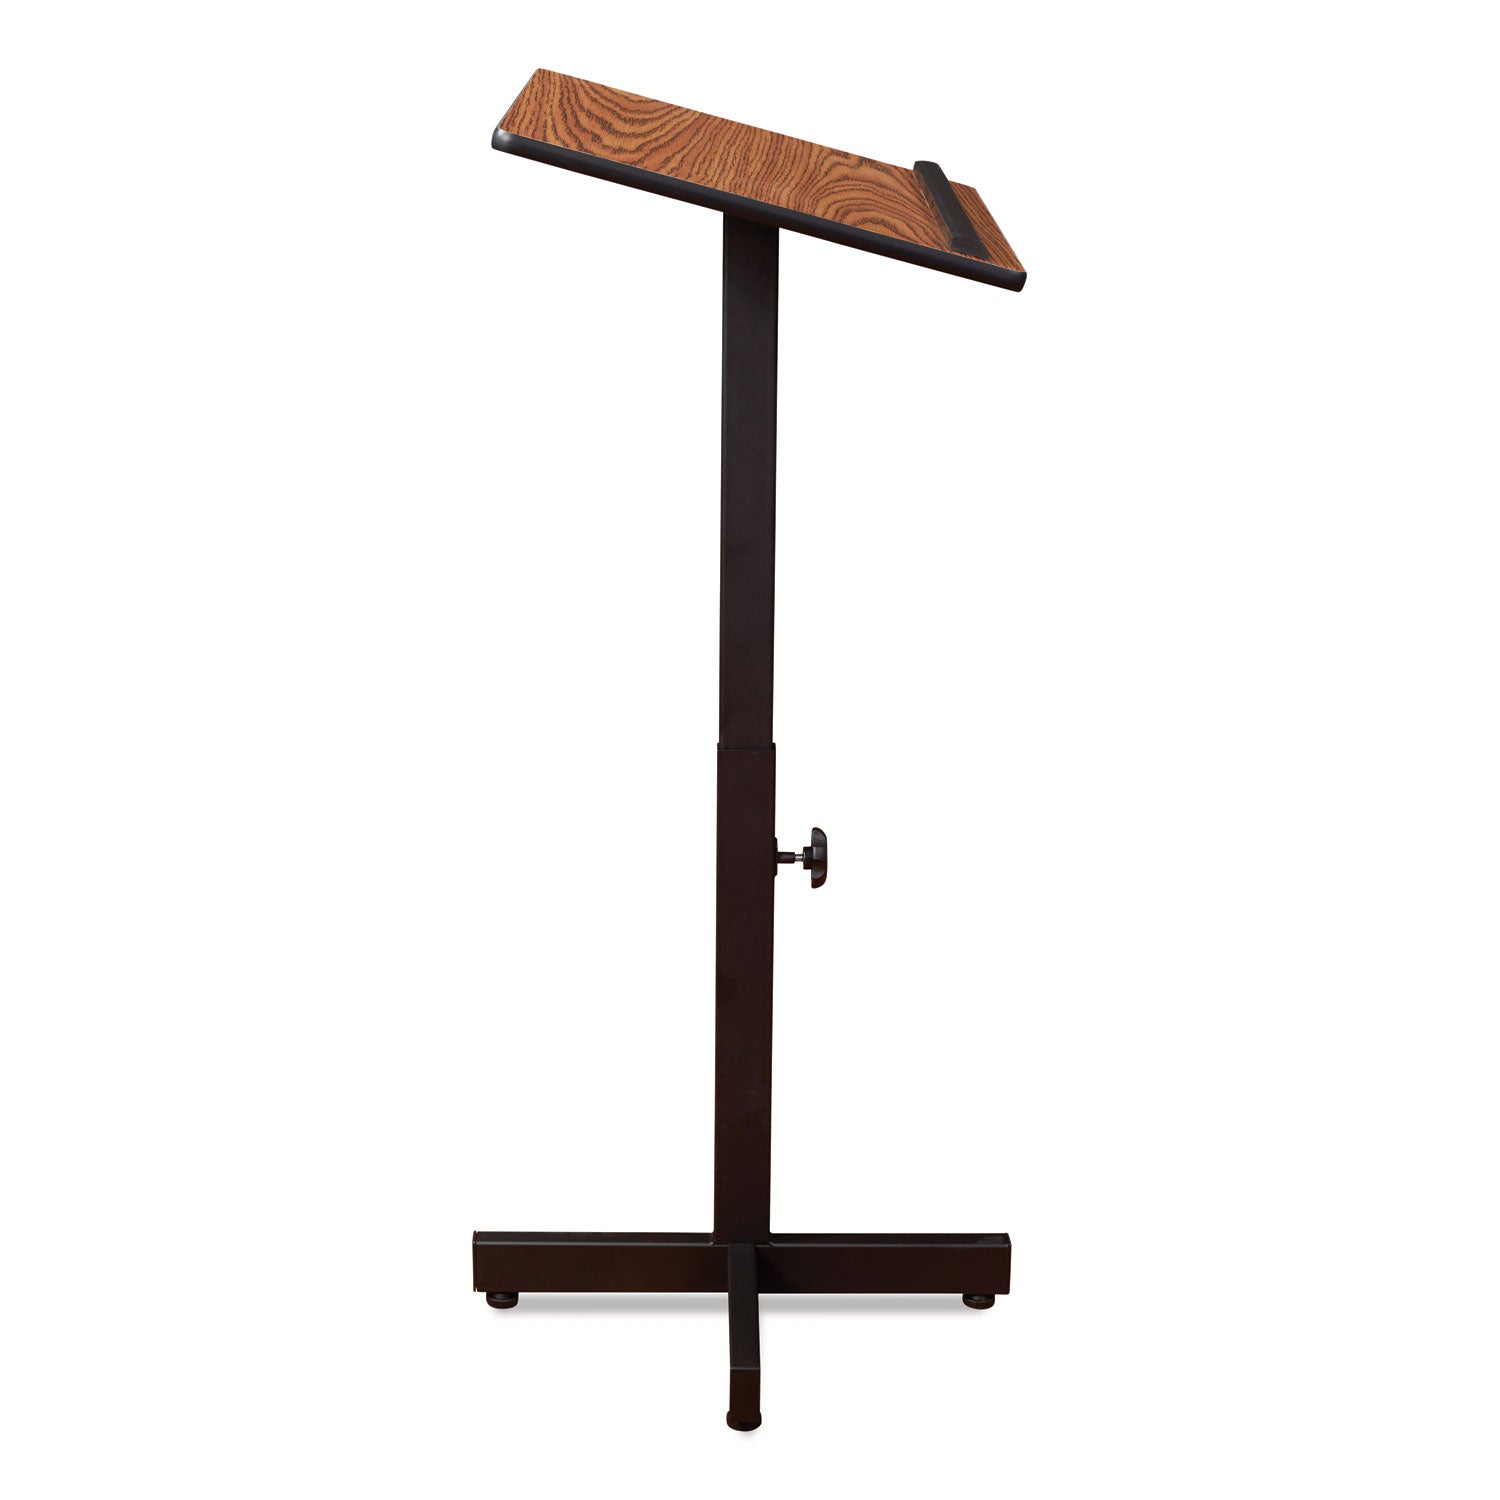 portable-presentation-lectern-stand-20-x-1825-x-44-medium-oak-ships-in-1-3-business-days_nps70mo - 3